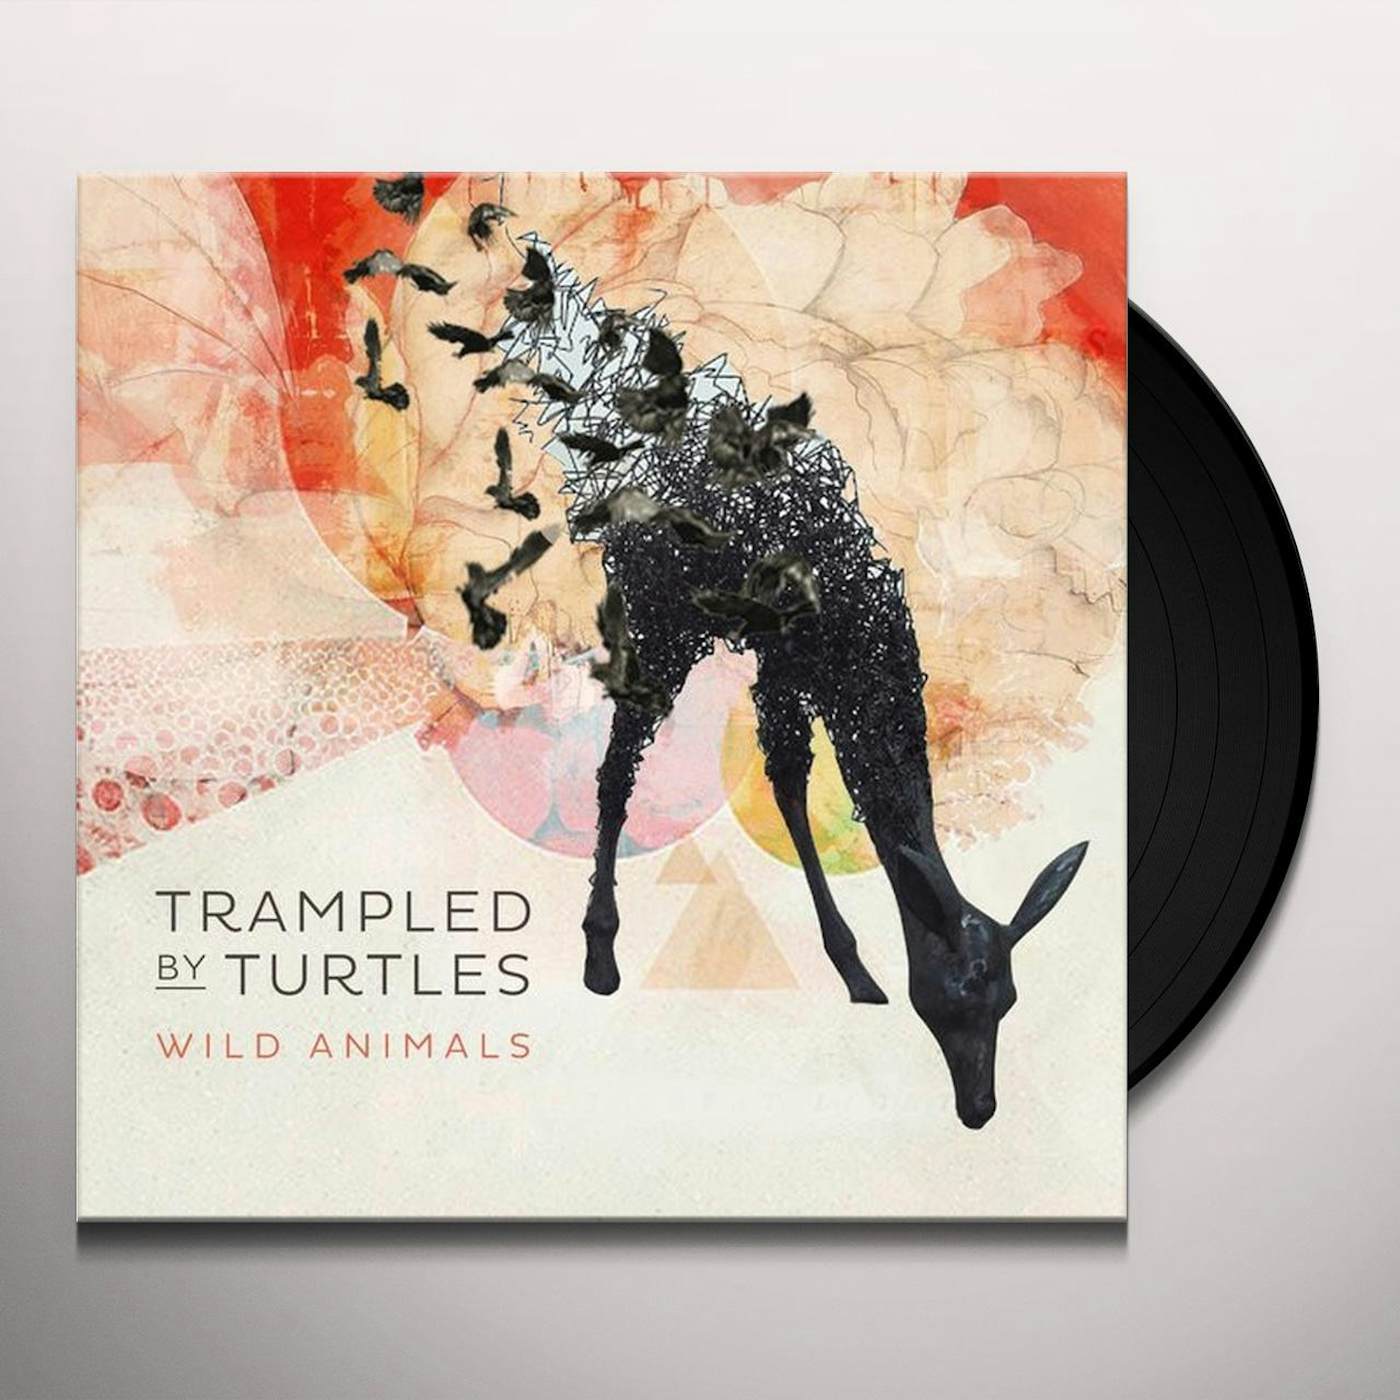 Trampled by Turtles Wild Animals Vinyl Record